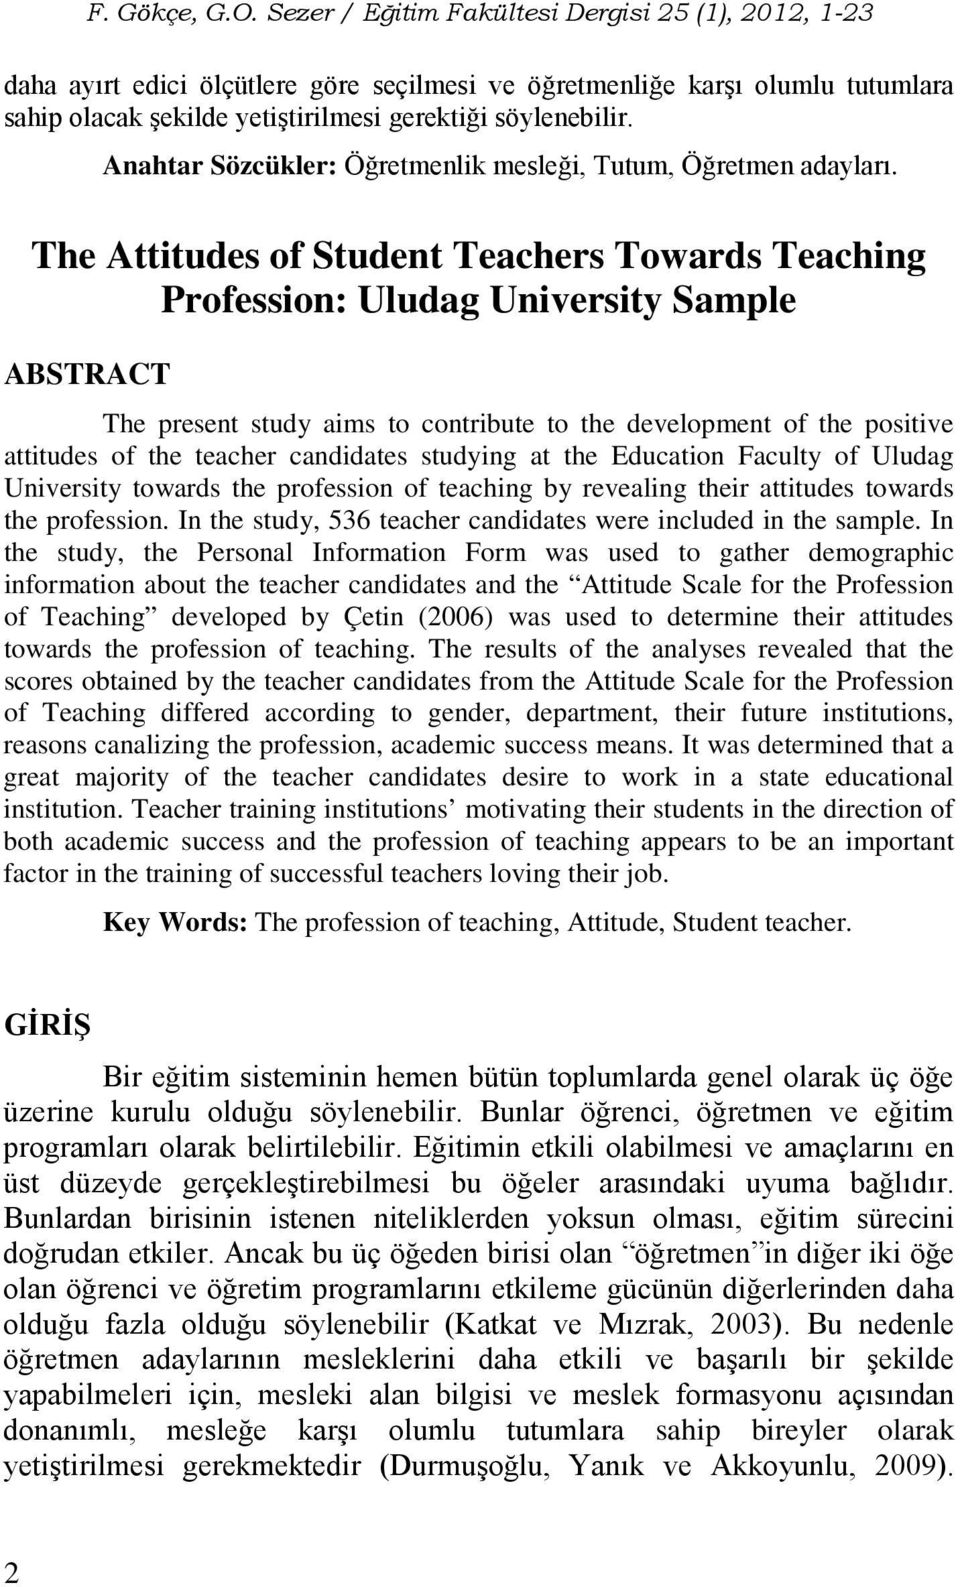 The Attitudes of Student Teachers Towards Teaching Profession: Uludag University Sample ABSTRACT The present study aims to contribute to the development of the positive attitudes of the teacher